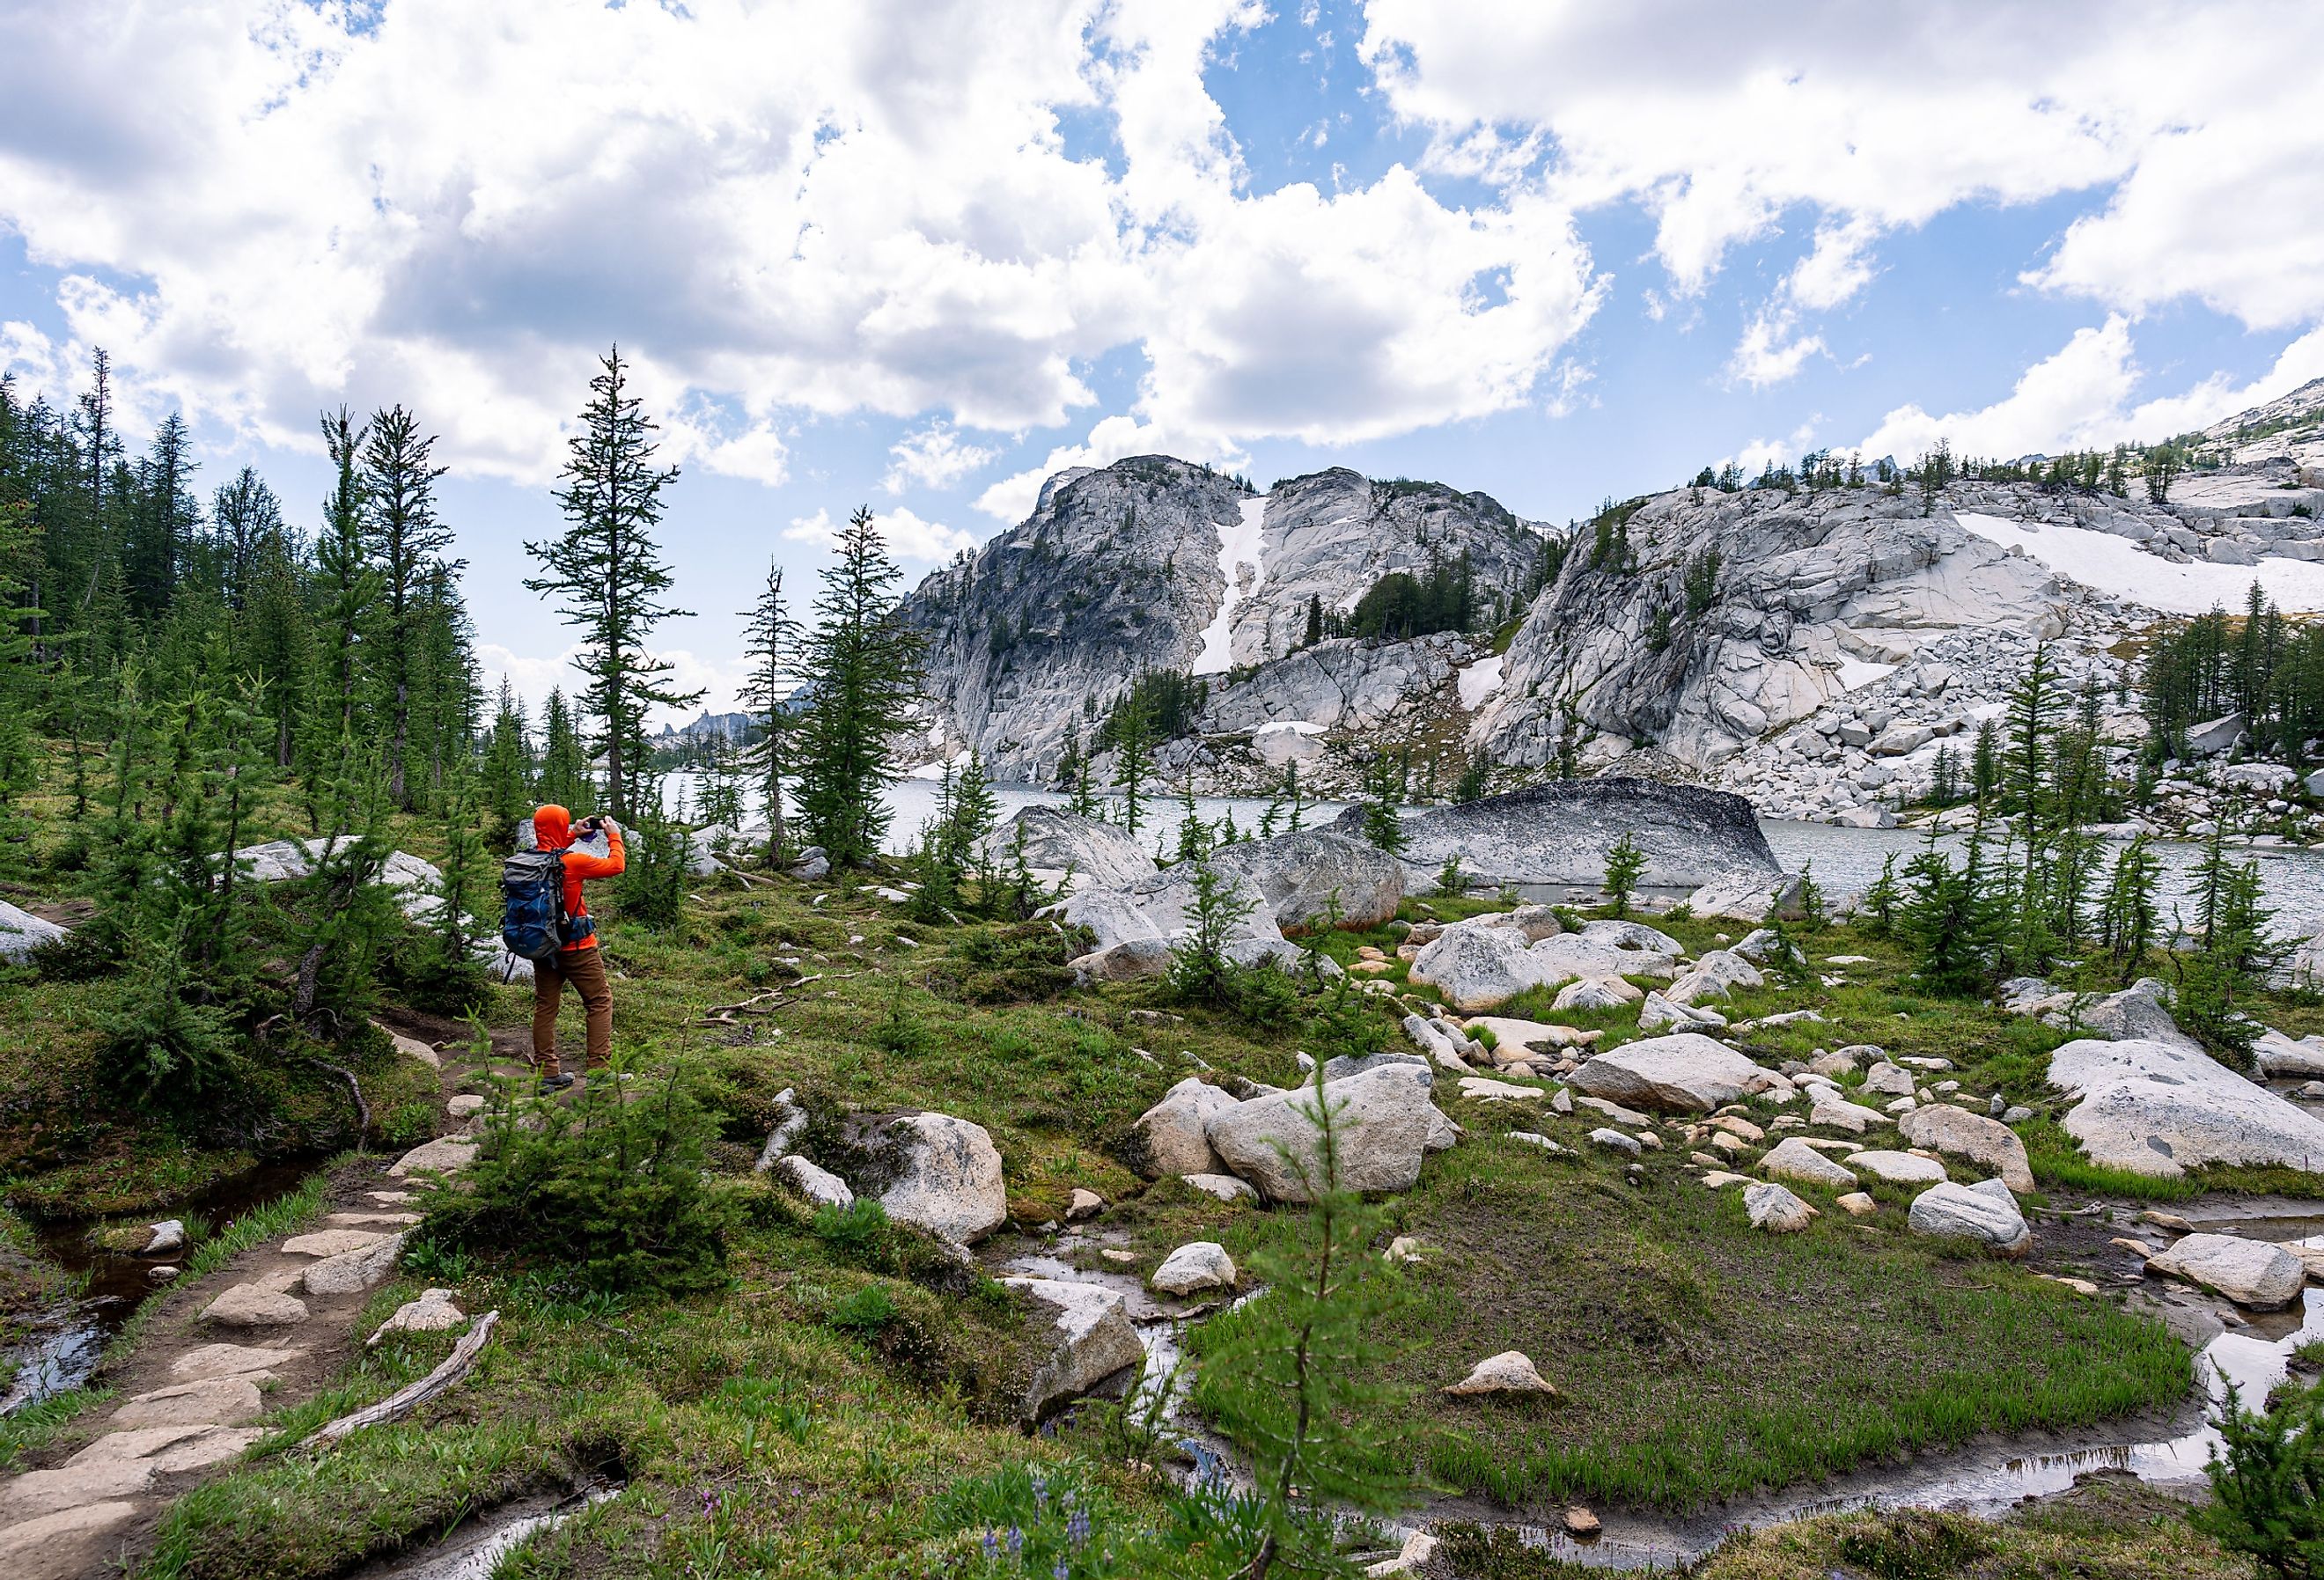 A man in bright orange shirt standing on hiking trail to take picture of beautiful lake and mountain while backpacking in the Enchantments, Leavenworth, Washington. Image credit Suchavadee via Shutterstock.